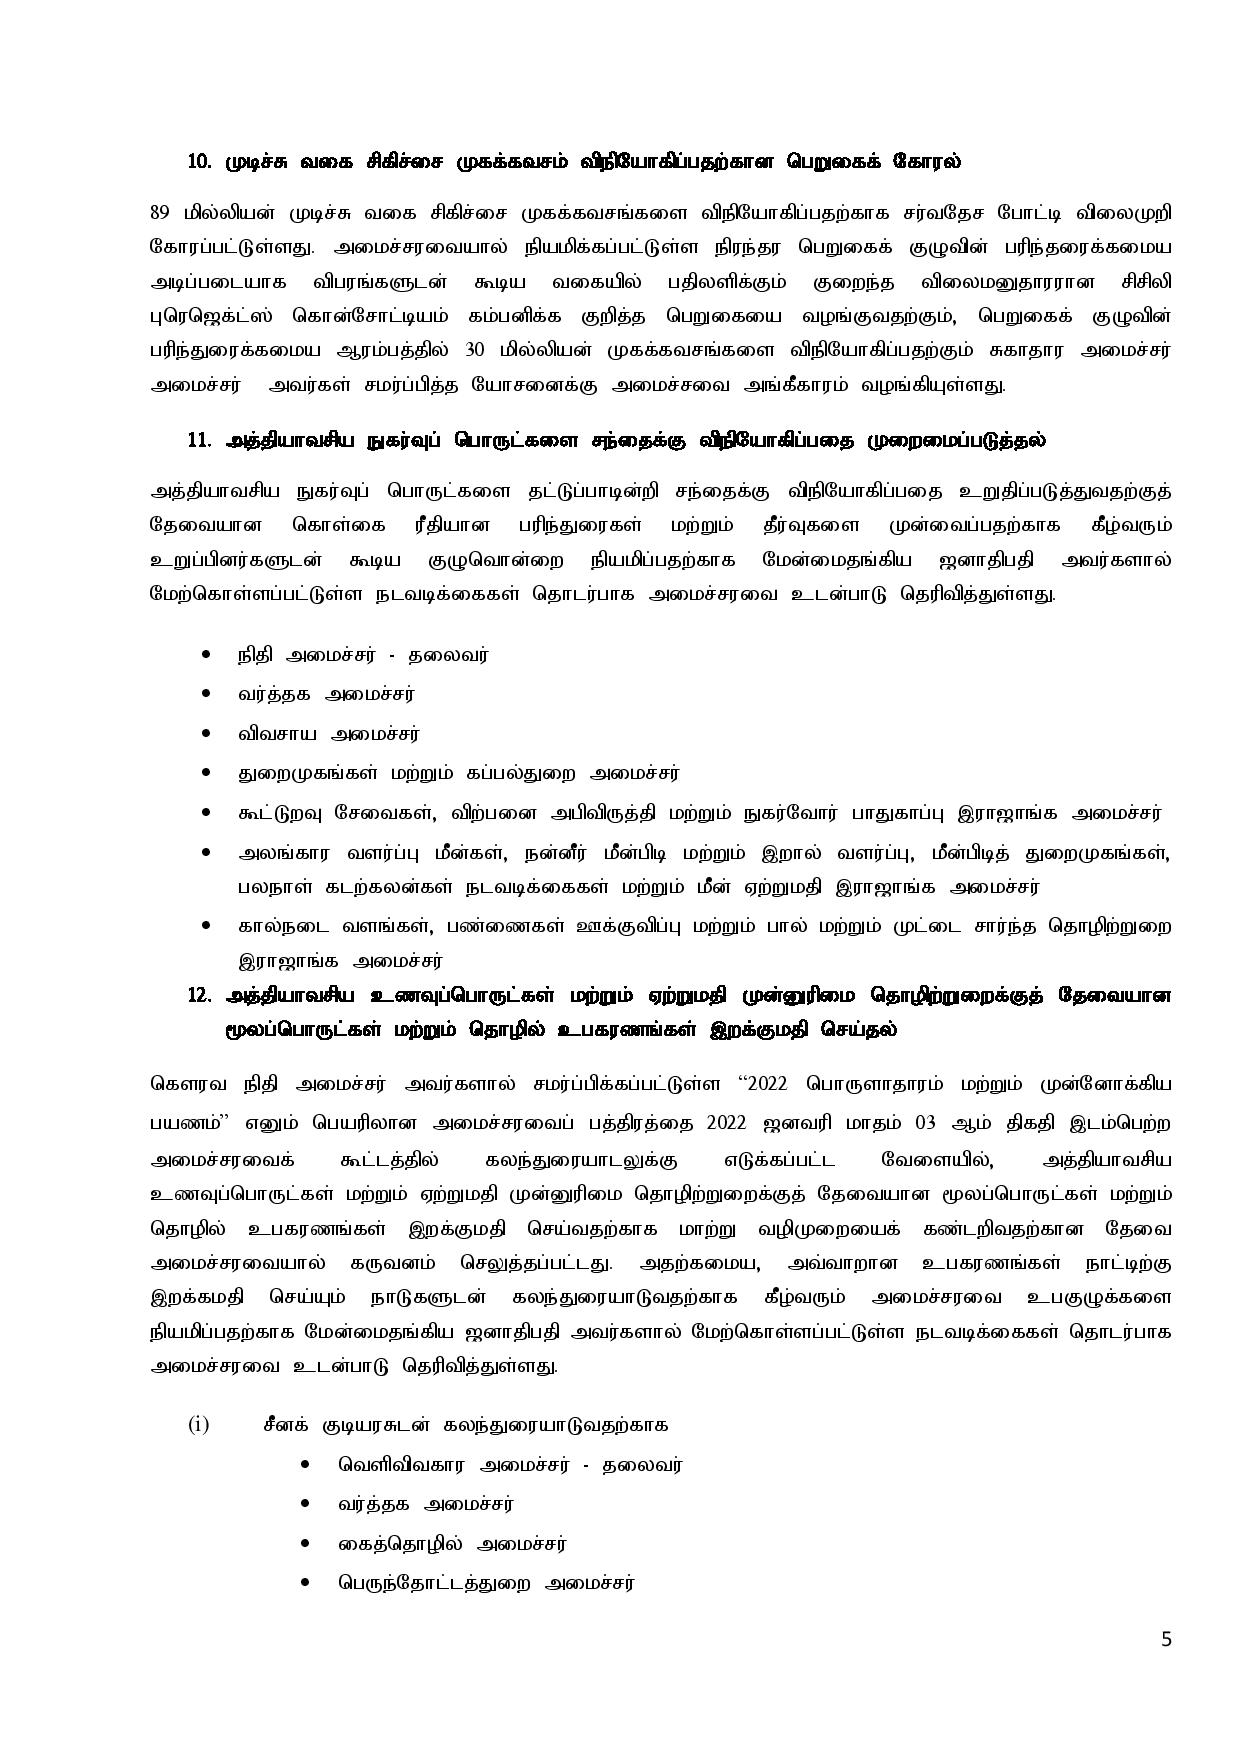 Cabinet Decisions on 14.02.2022 Tamil page 005